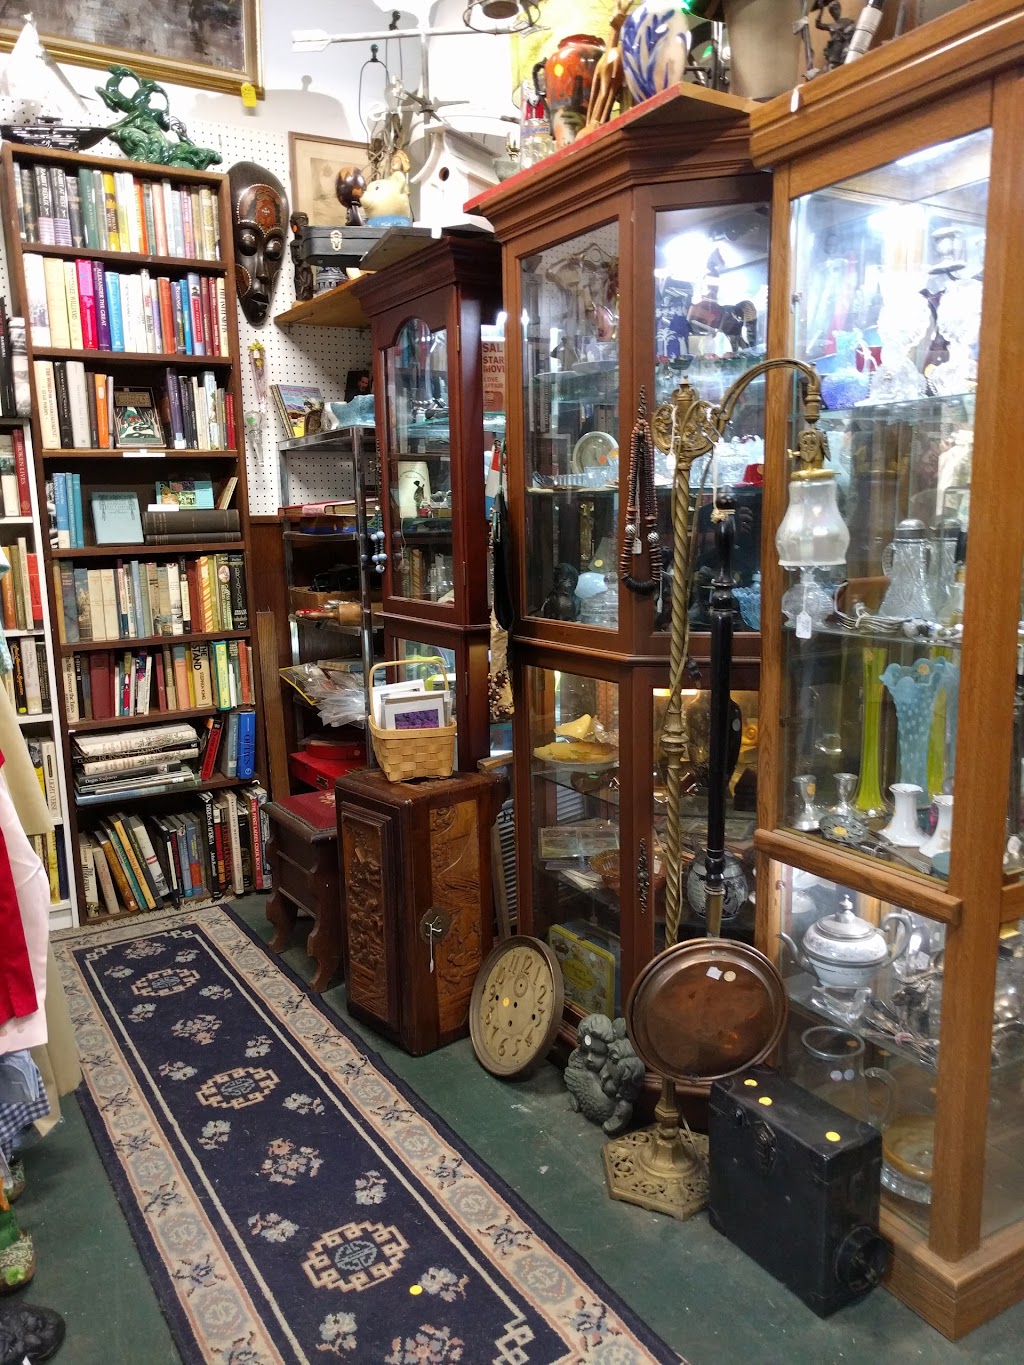 Cold Spring Antiques Center | 77 Main St, Cold Spring, NY 10516 | Phone: (845) 265-5050